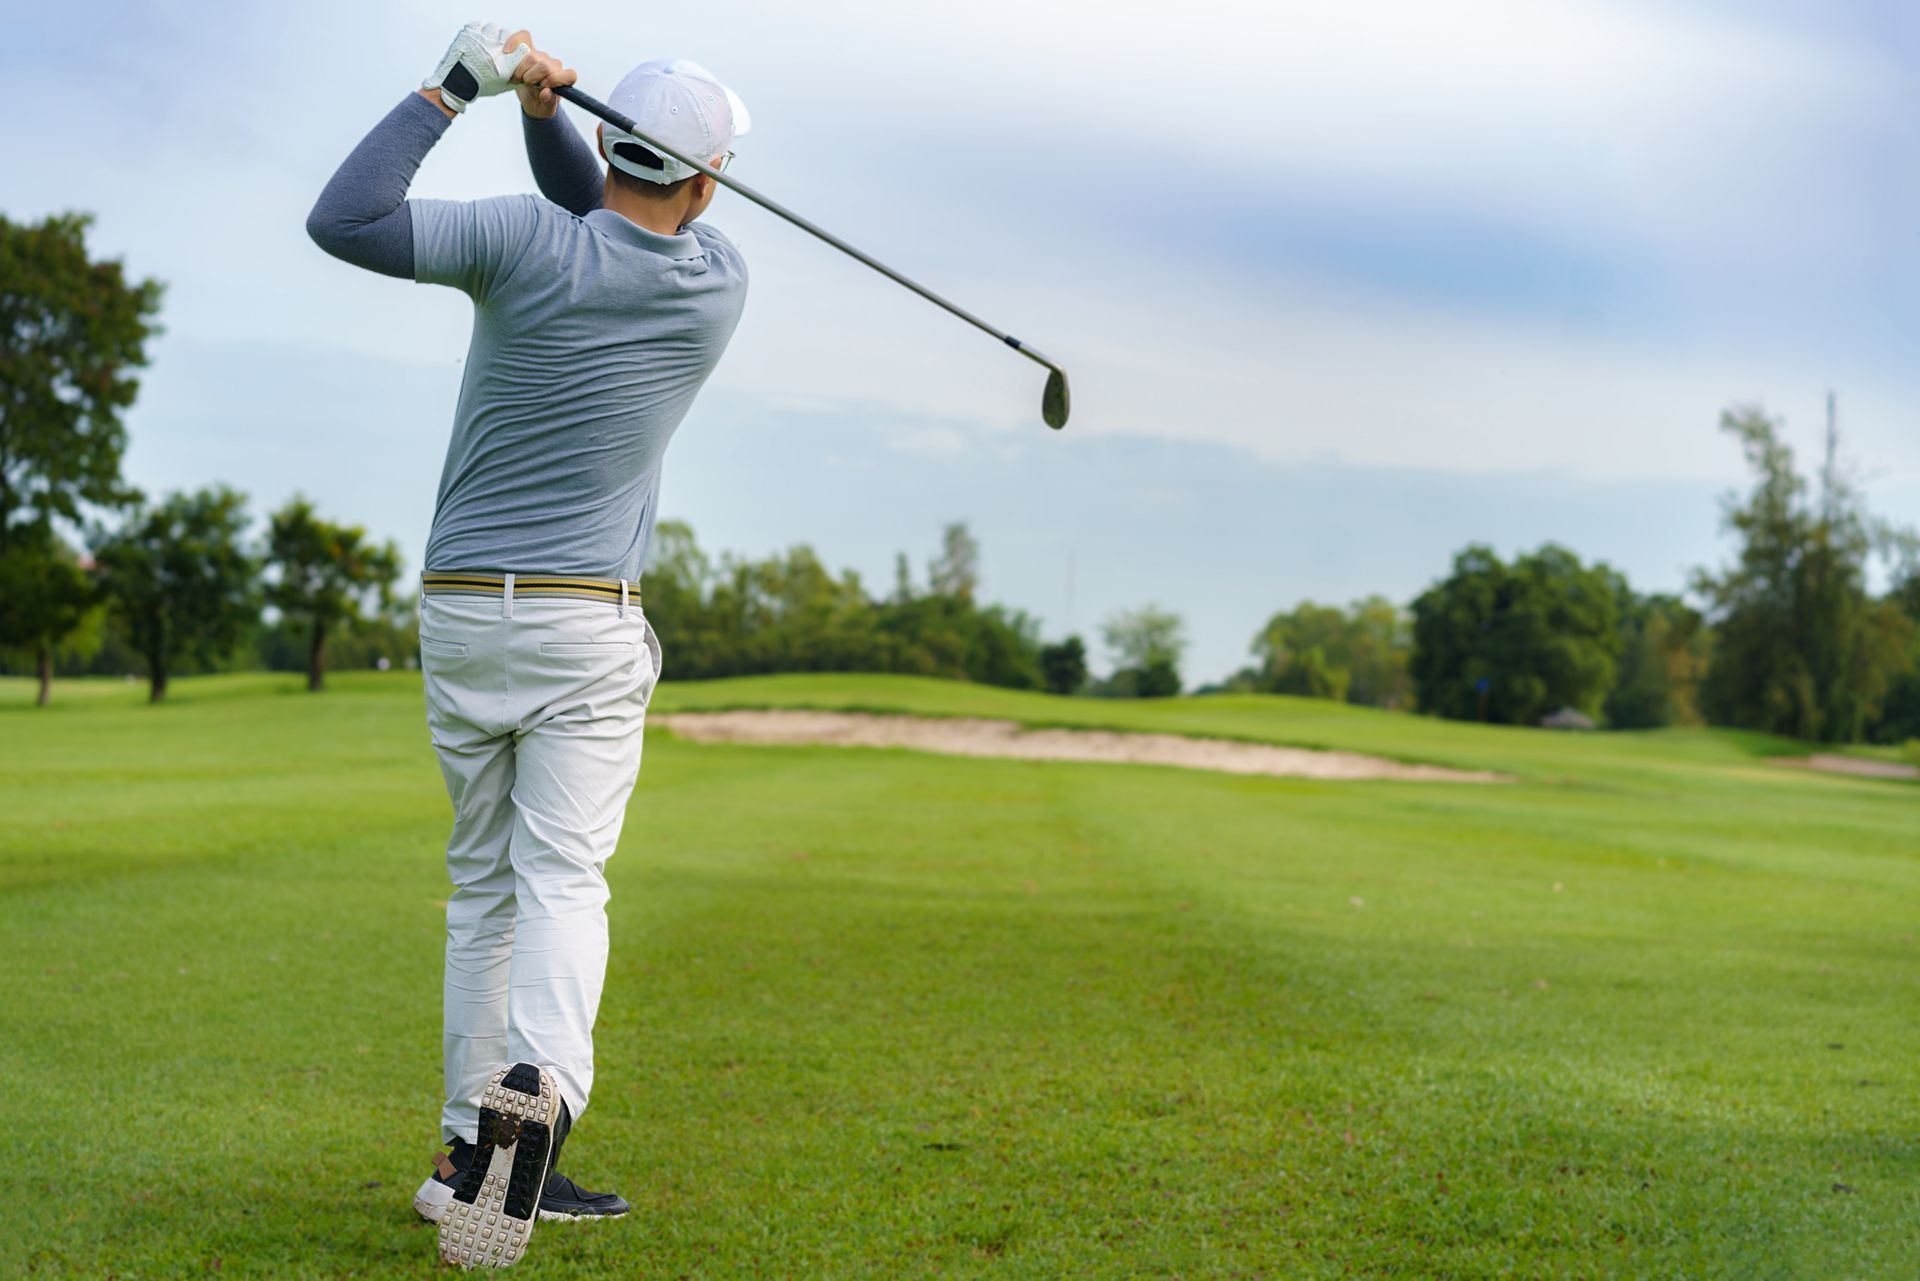 A man is swinging a golf club on a golf course. - Your South Florida Real Estate Expert